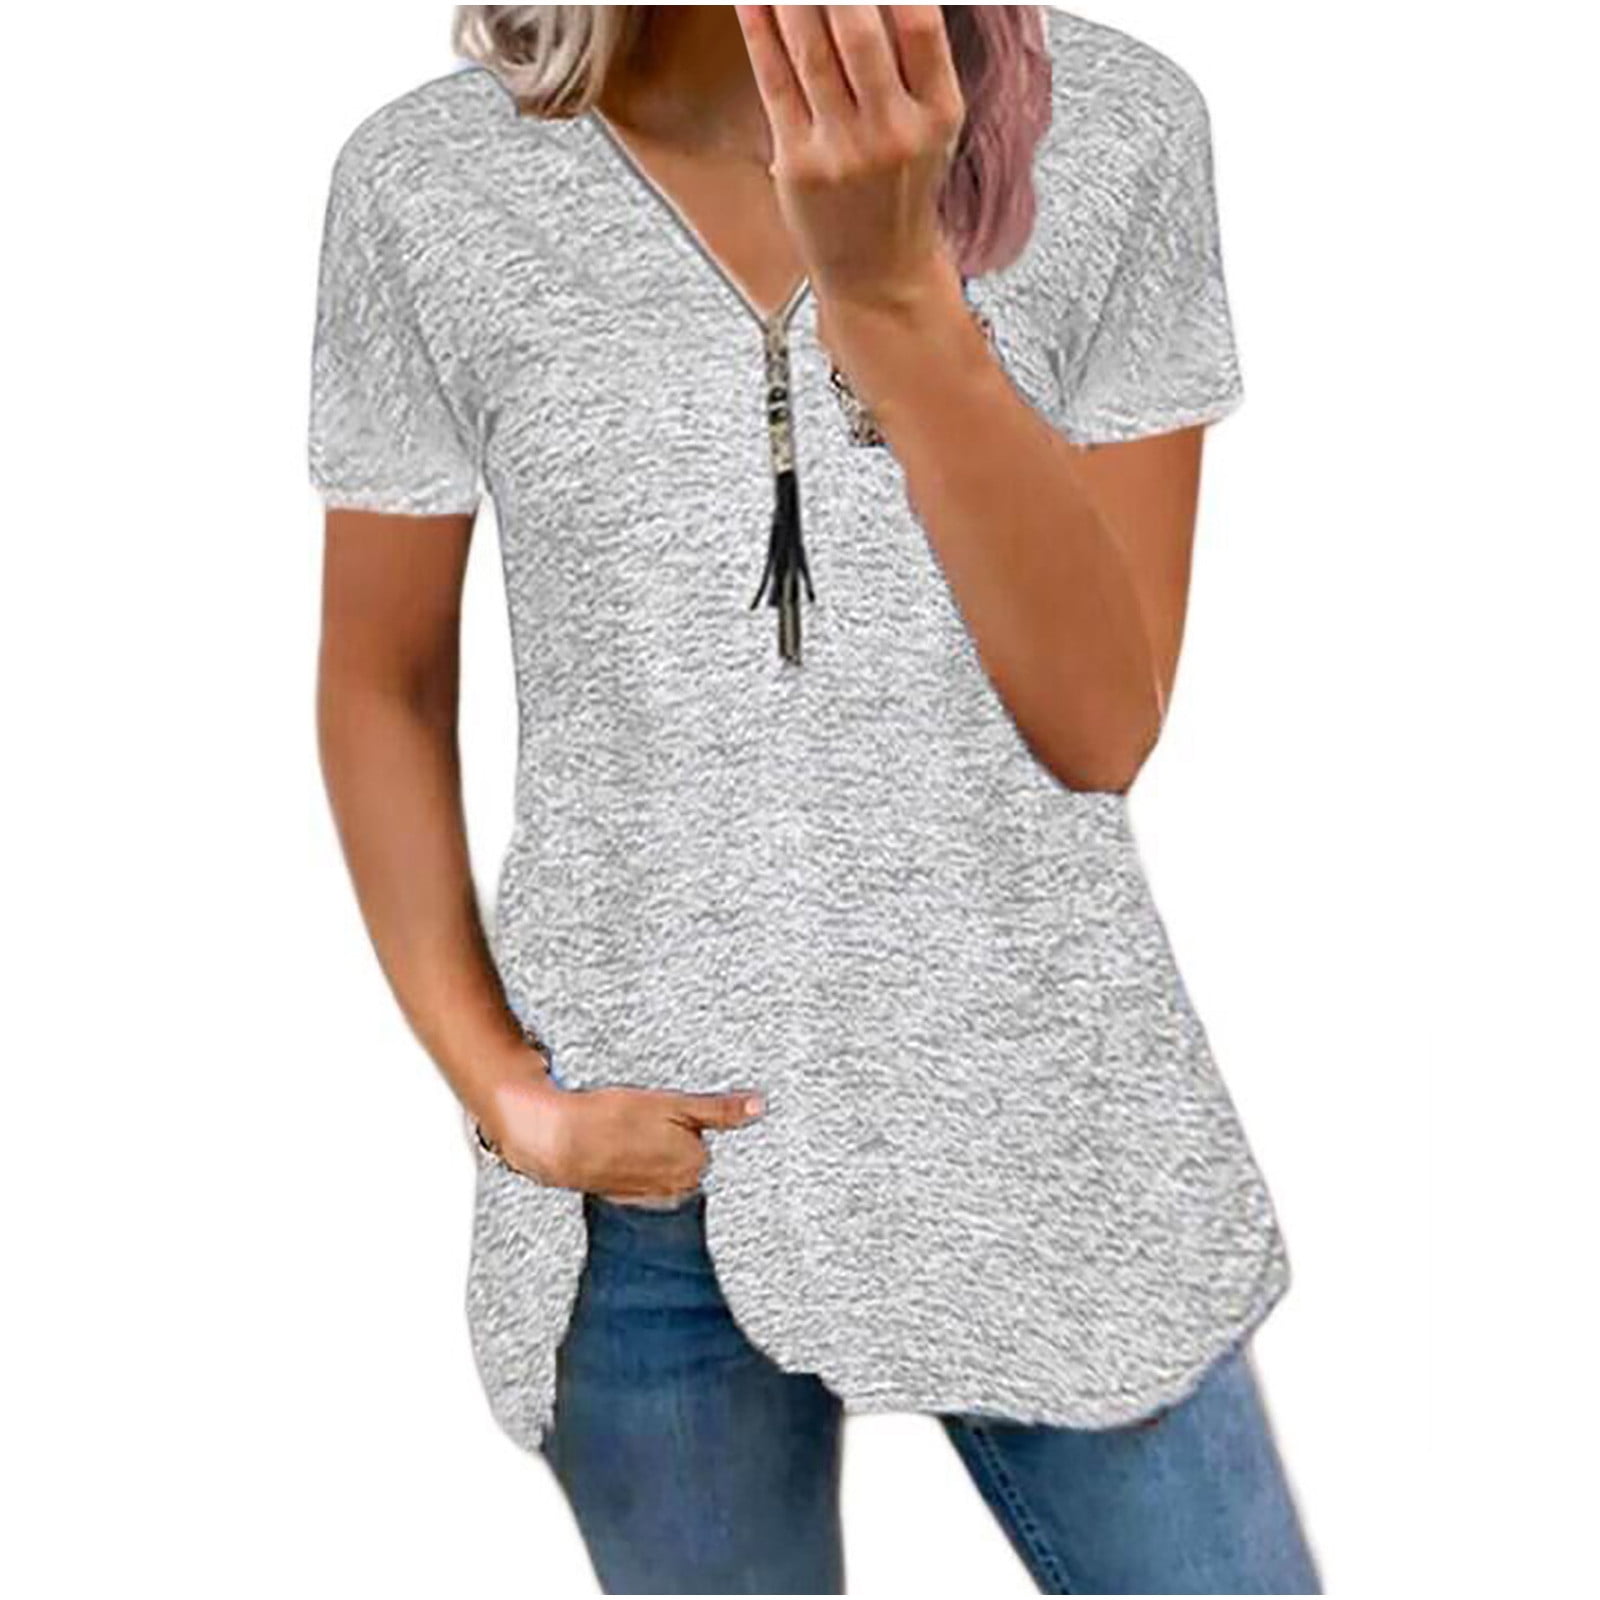 Amazon Ladies Sparkly Tops | vlr.eng.br